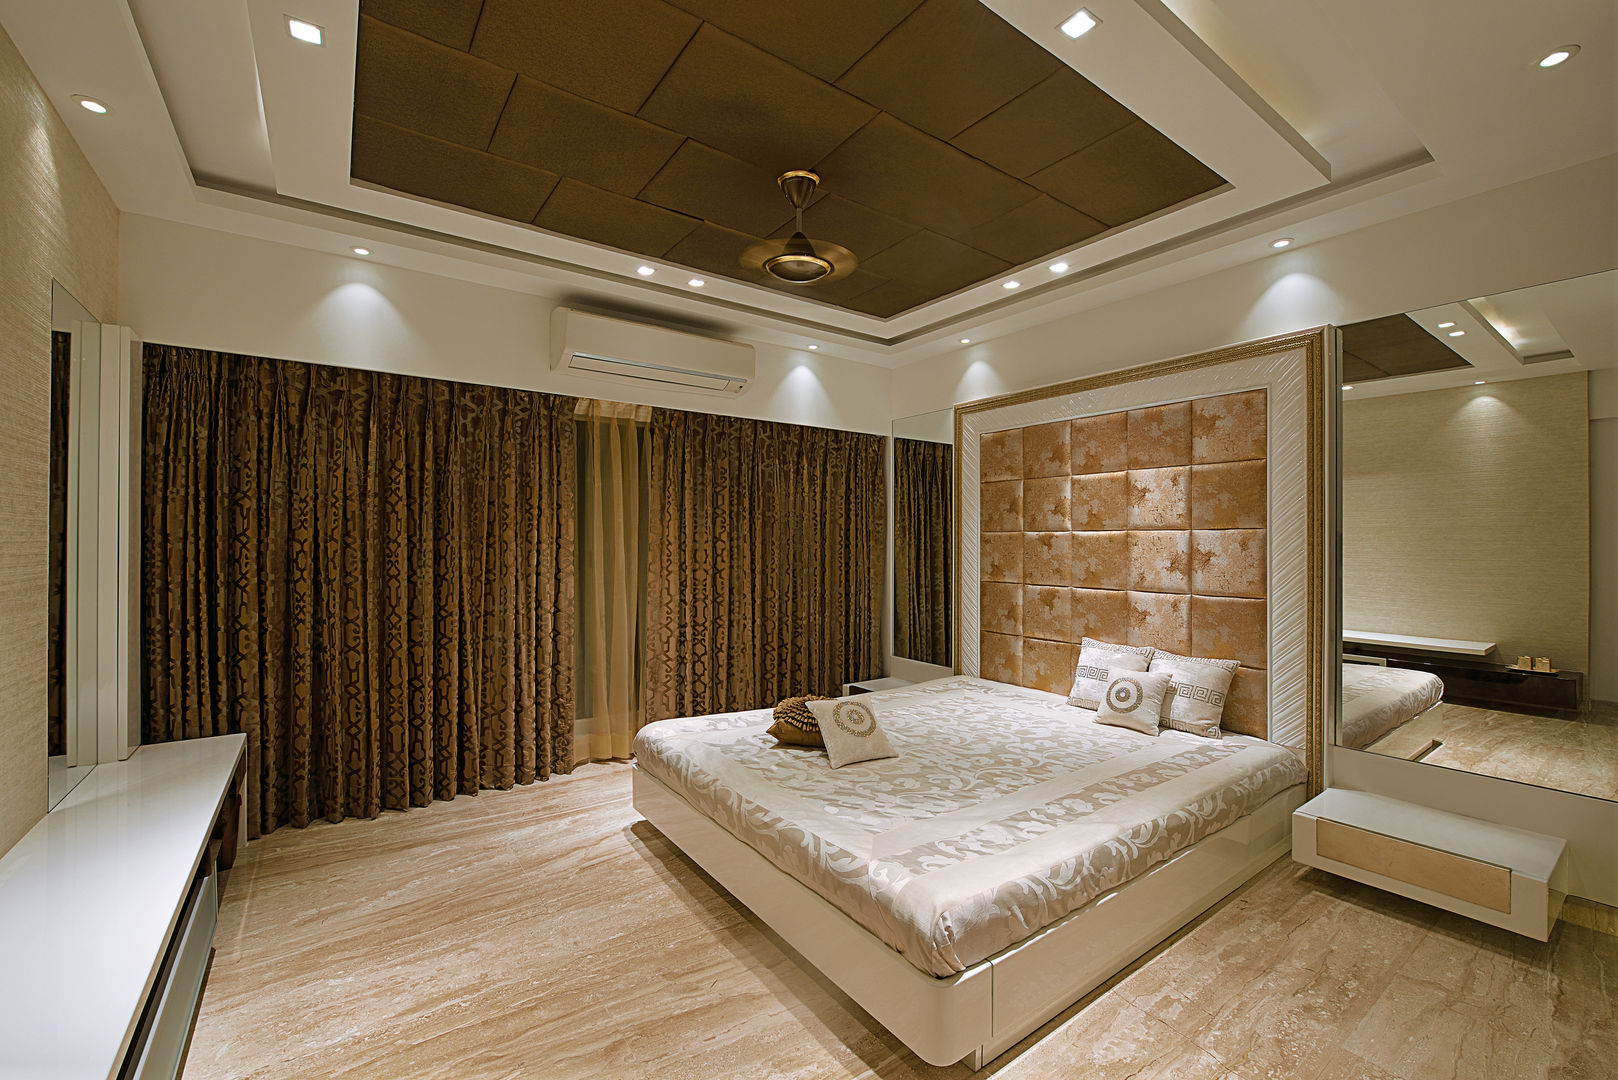 Residence at Khar, Milind Pai - Architects & Interior Designers Milind Pai - Architects & Interior Designers Modern style bedroom